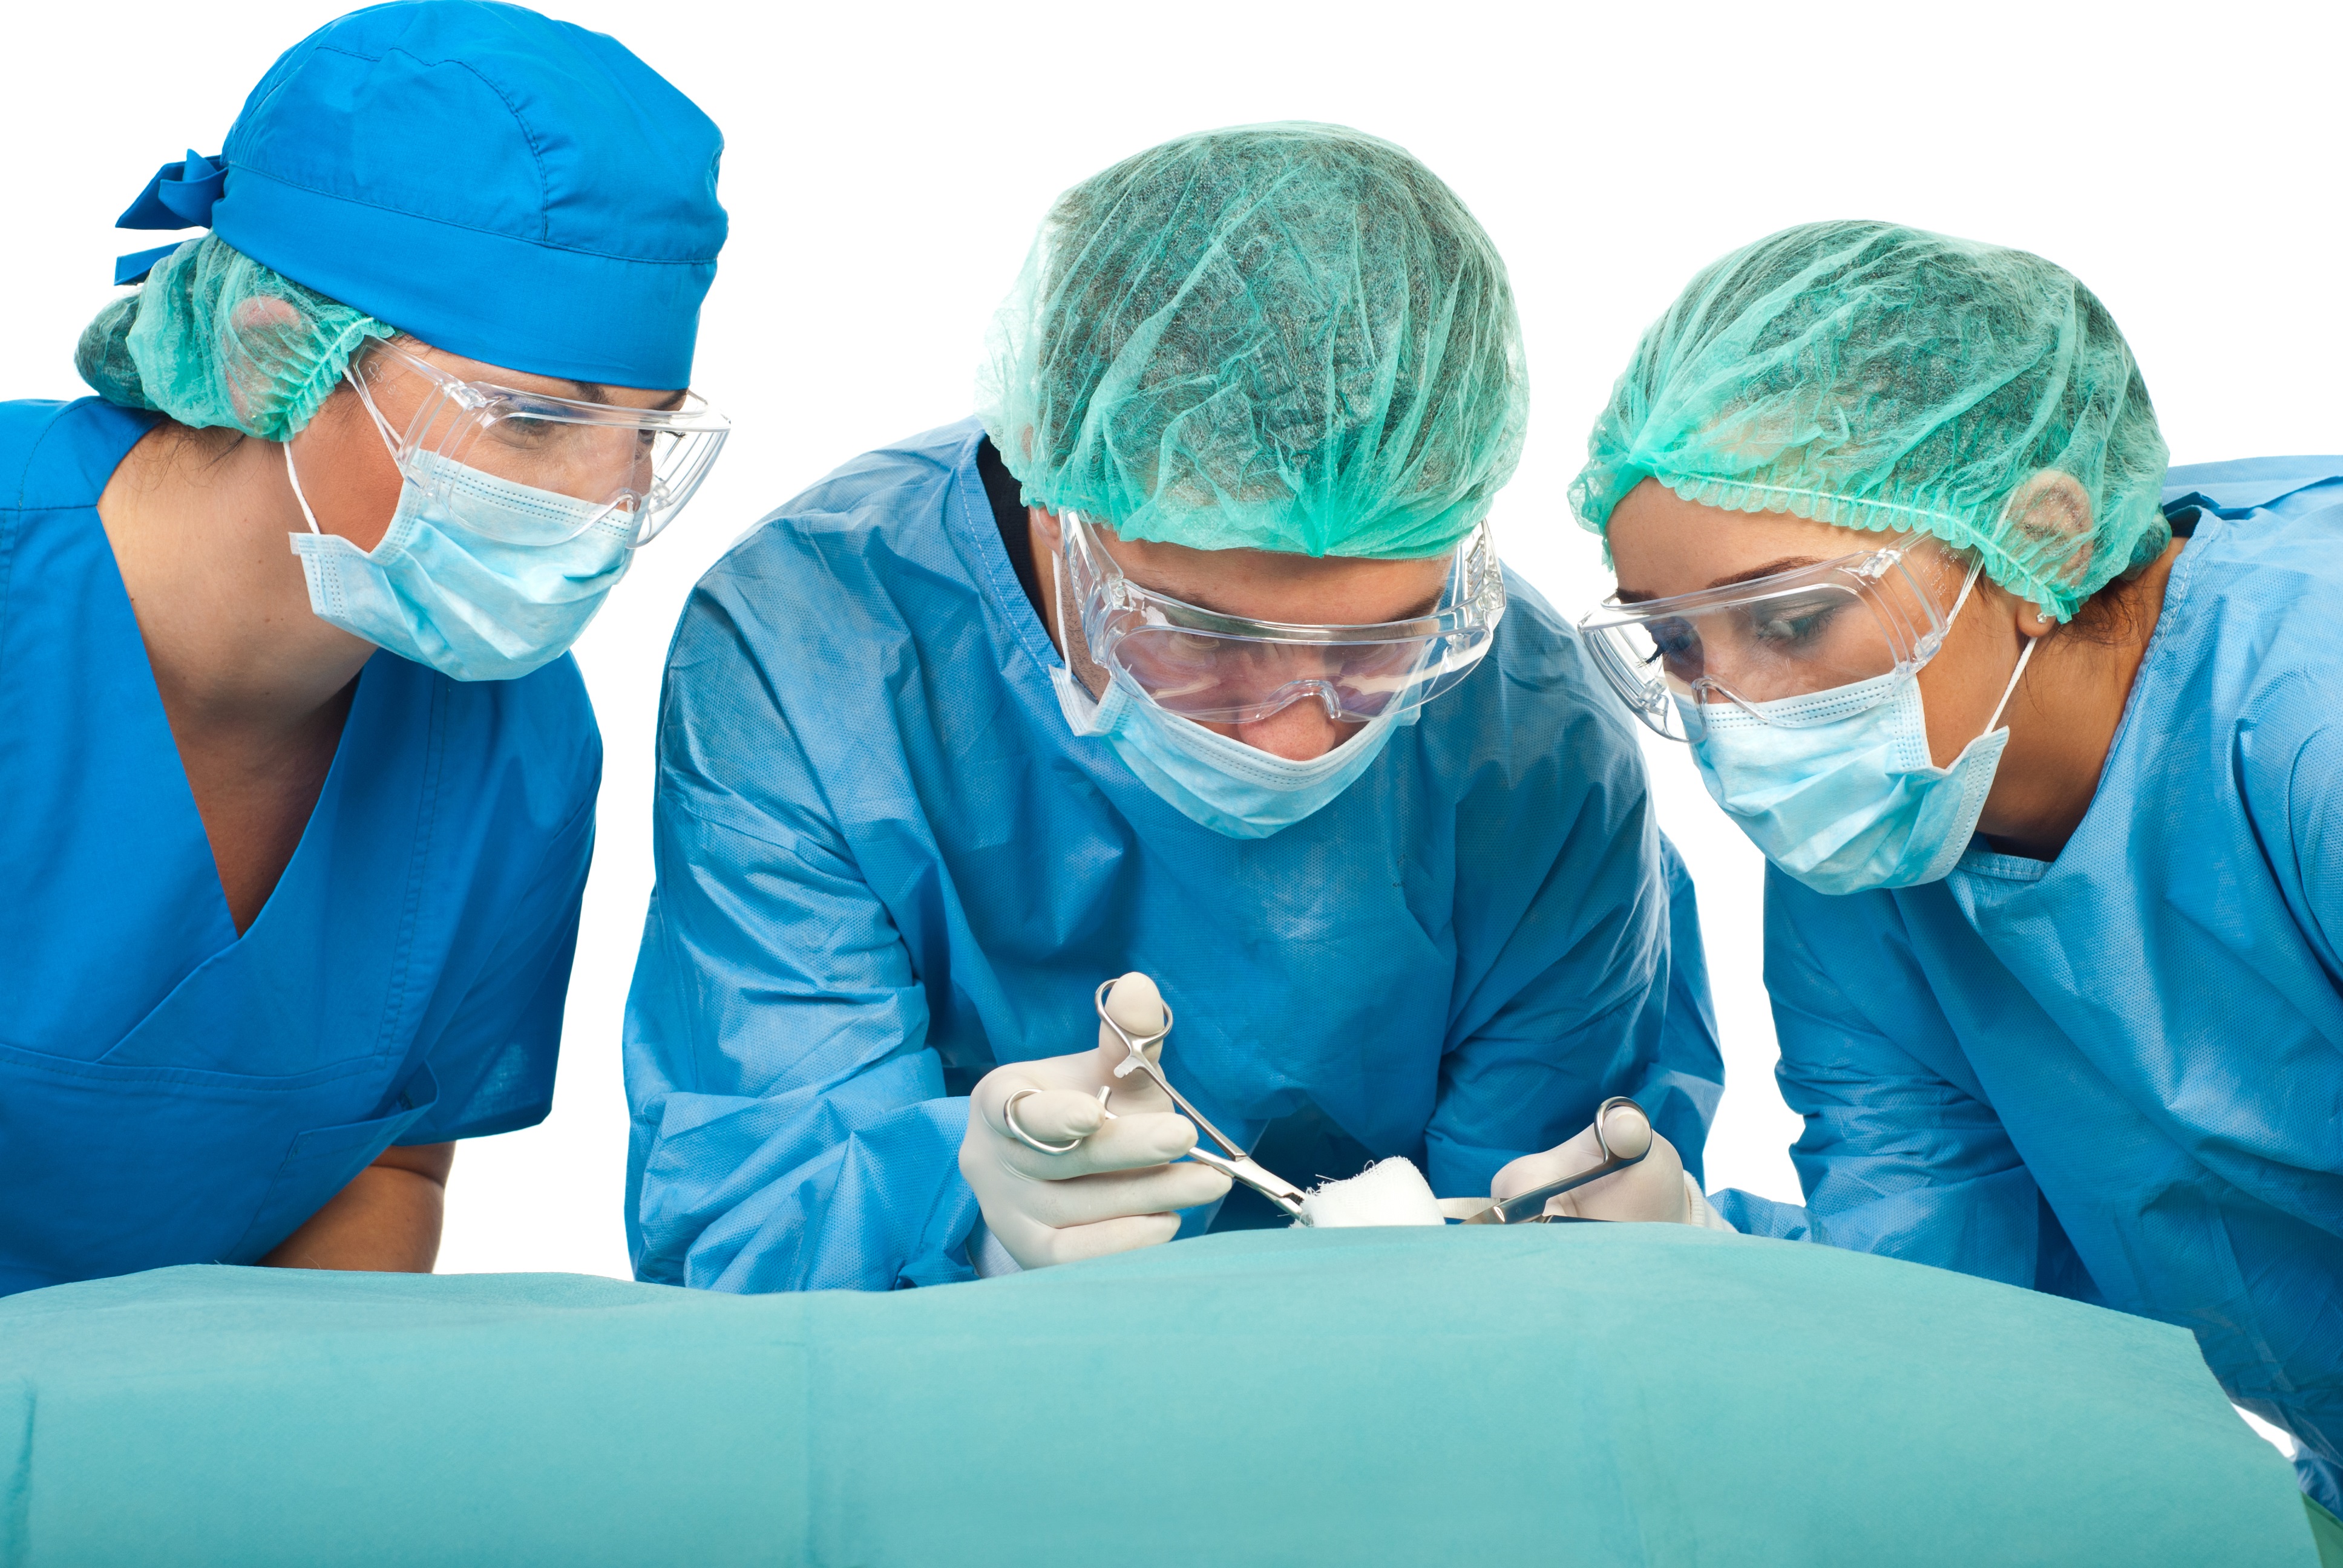 three surgeons doing a surgery wearing blue gowns and head and